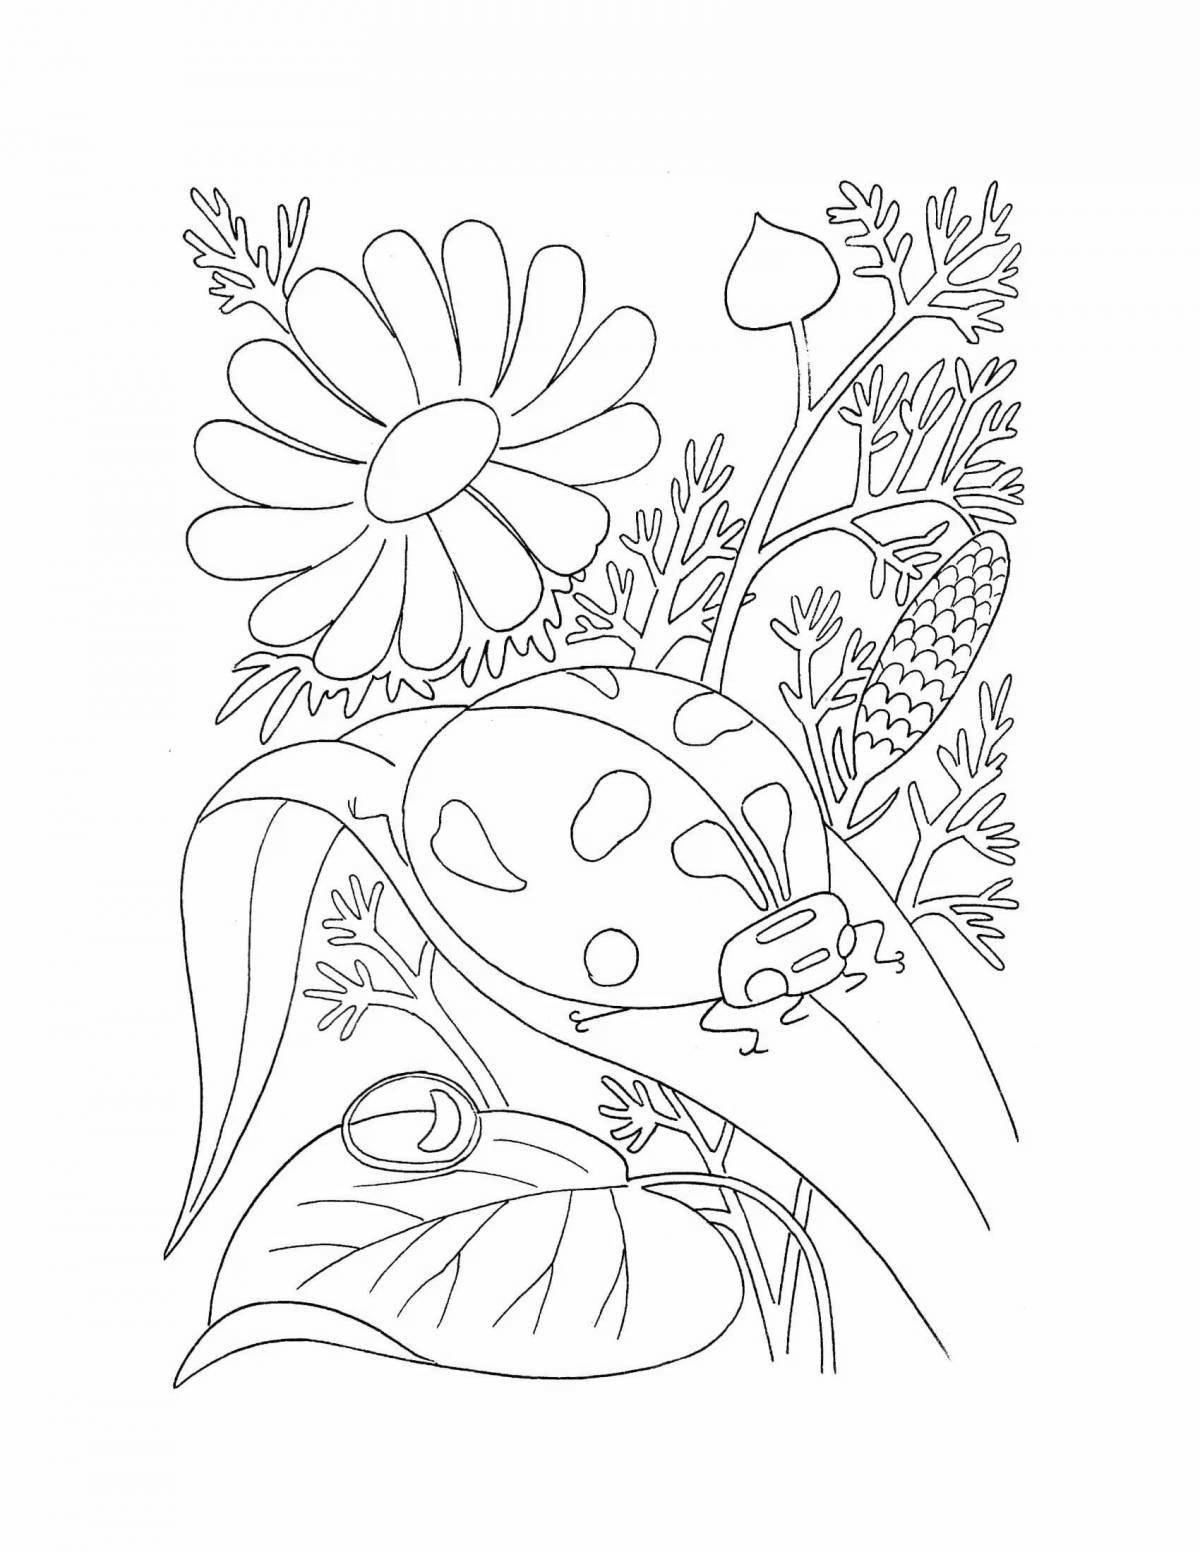 Glowing meadow coloring book for kids